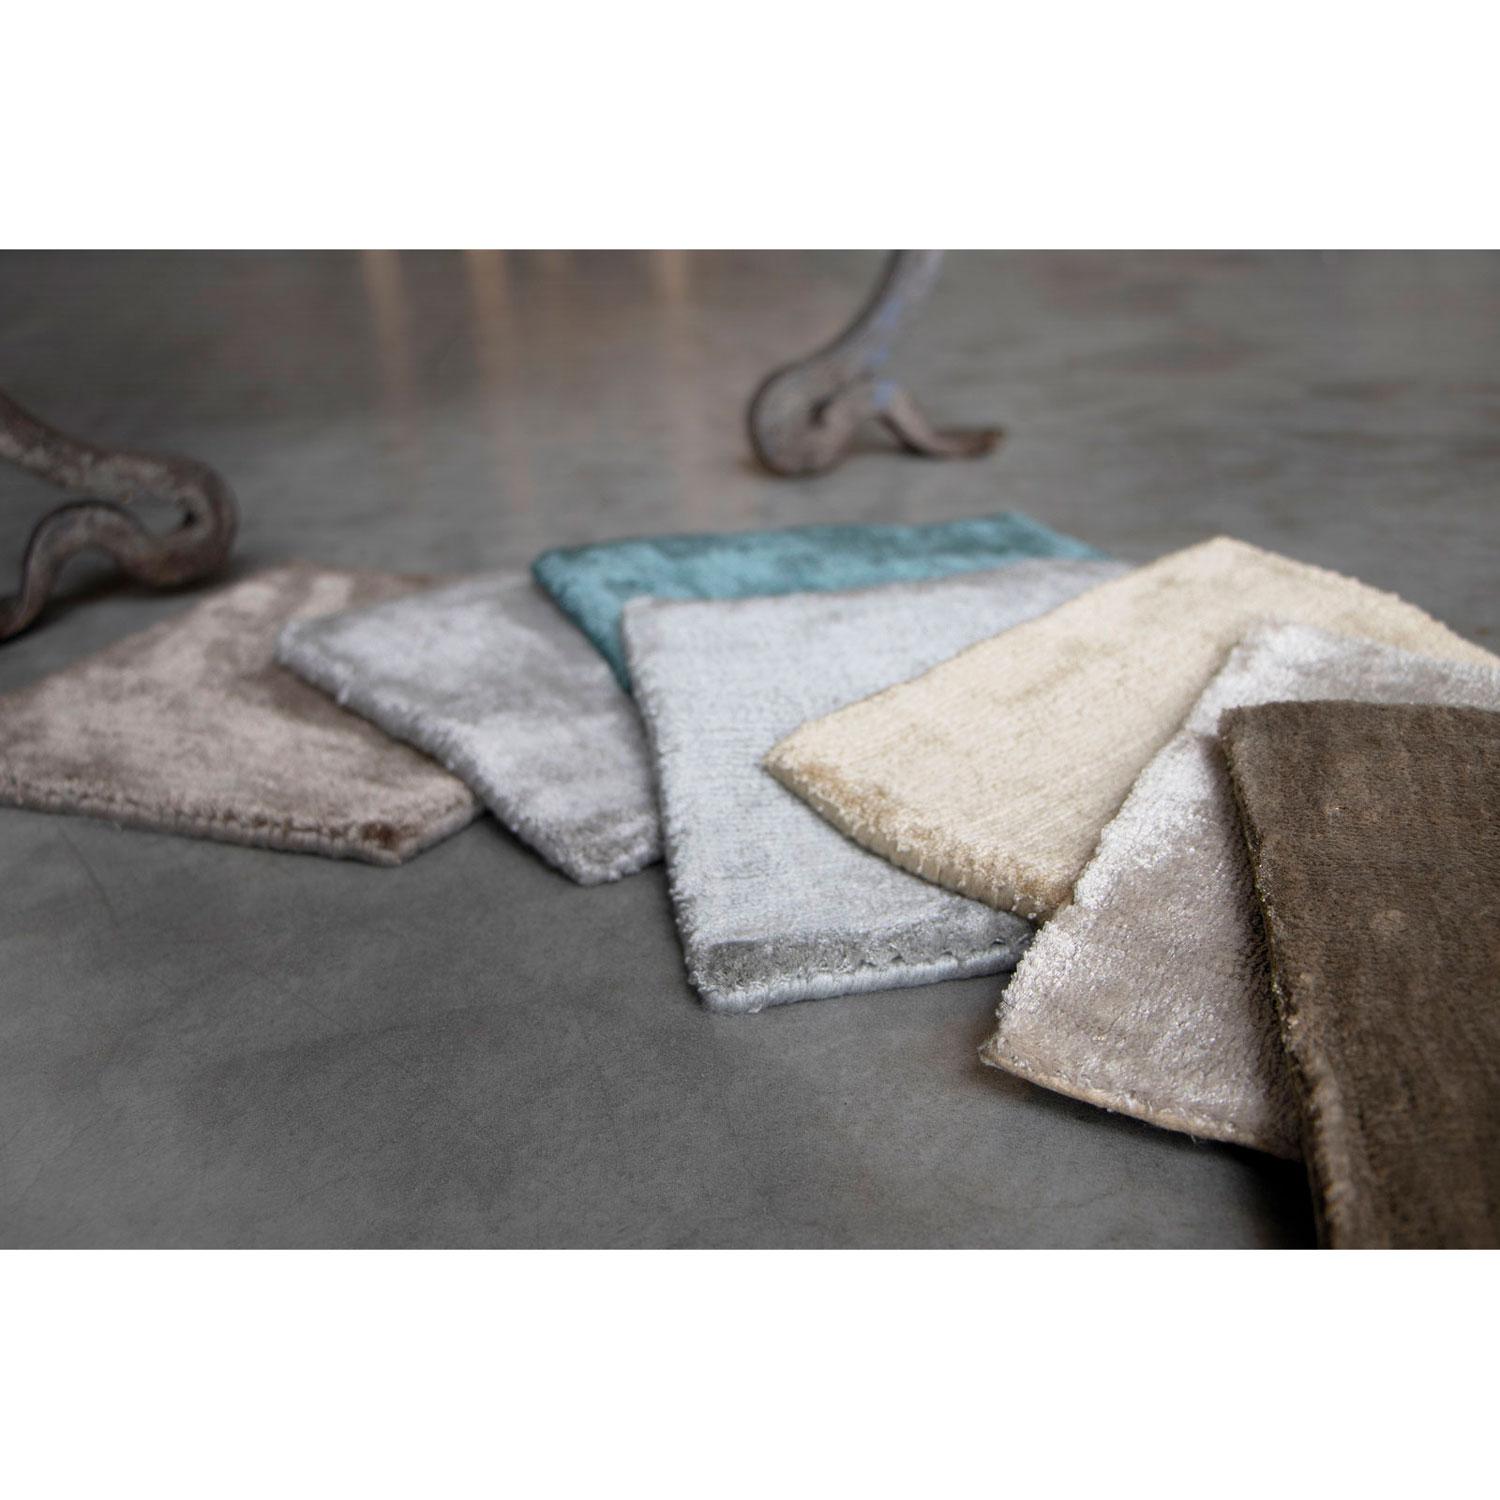 Hand-Woven Contemporary Sustainable Shiny Ecru Rug by Deanna Comellini In Stock 200x300 cm For Sale